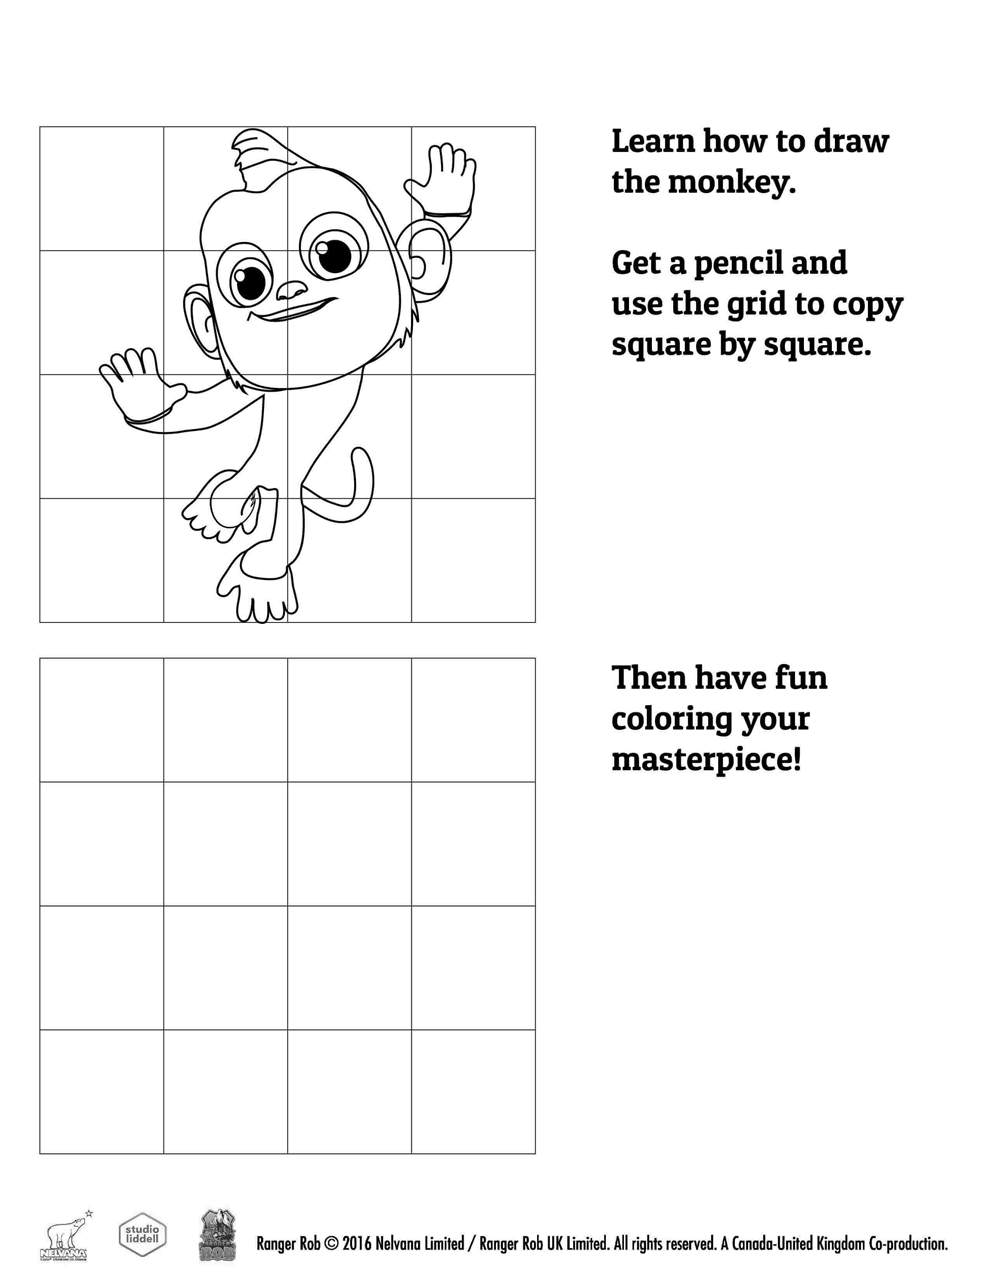 Free Ranger Rob Coloring Pages Monkey Activity Sheets printable